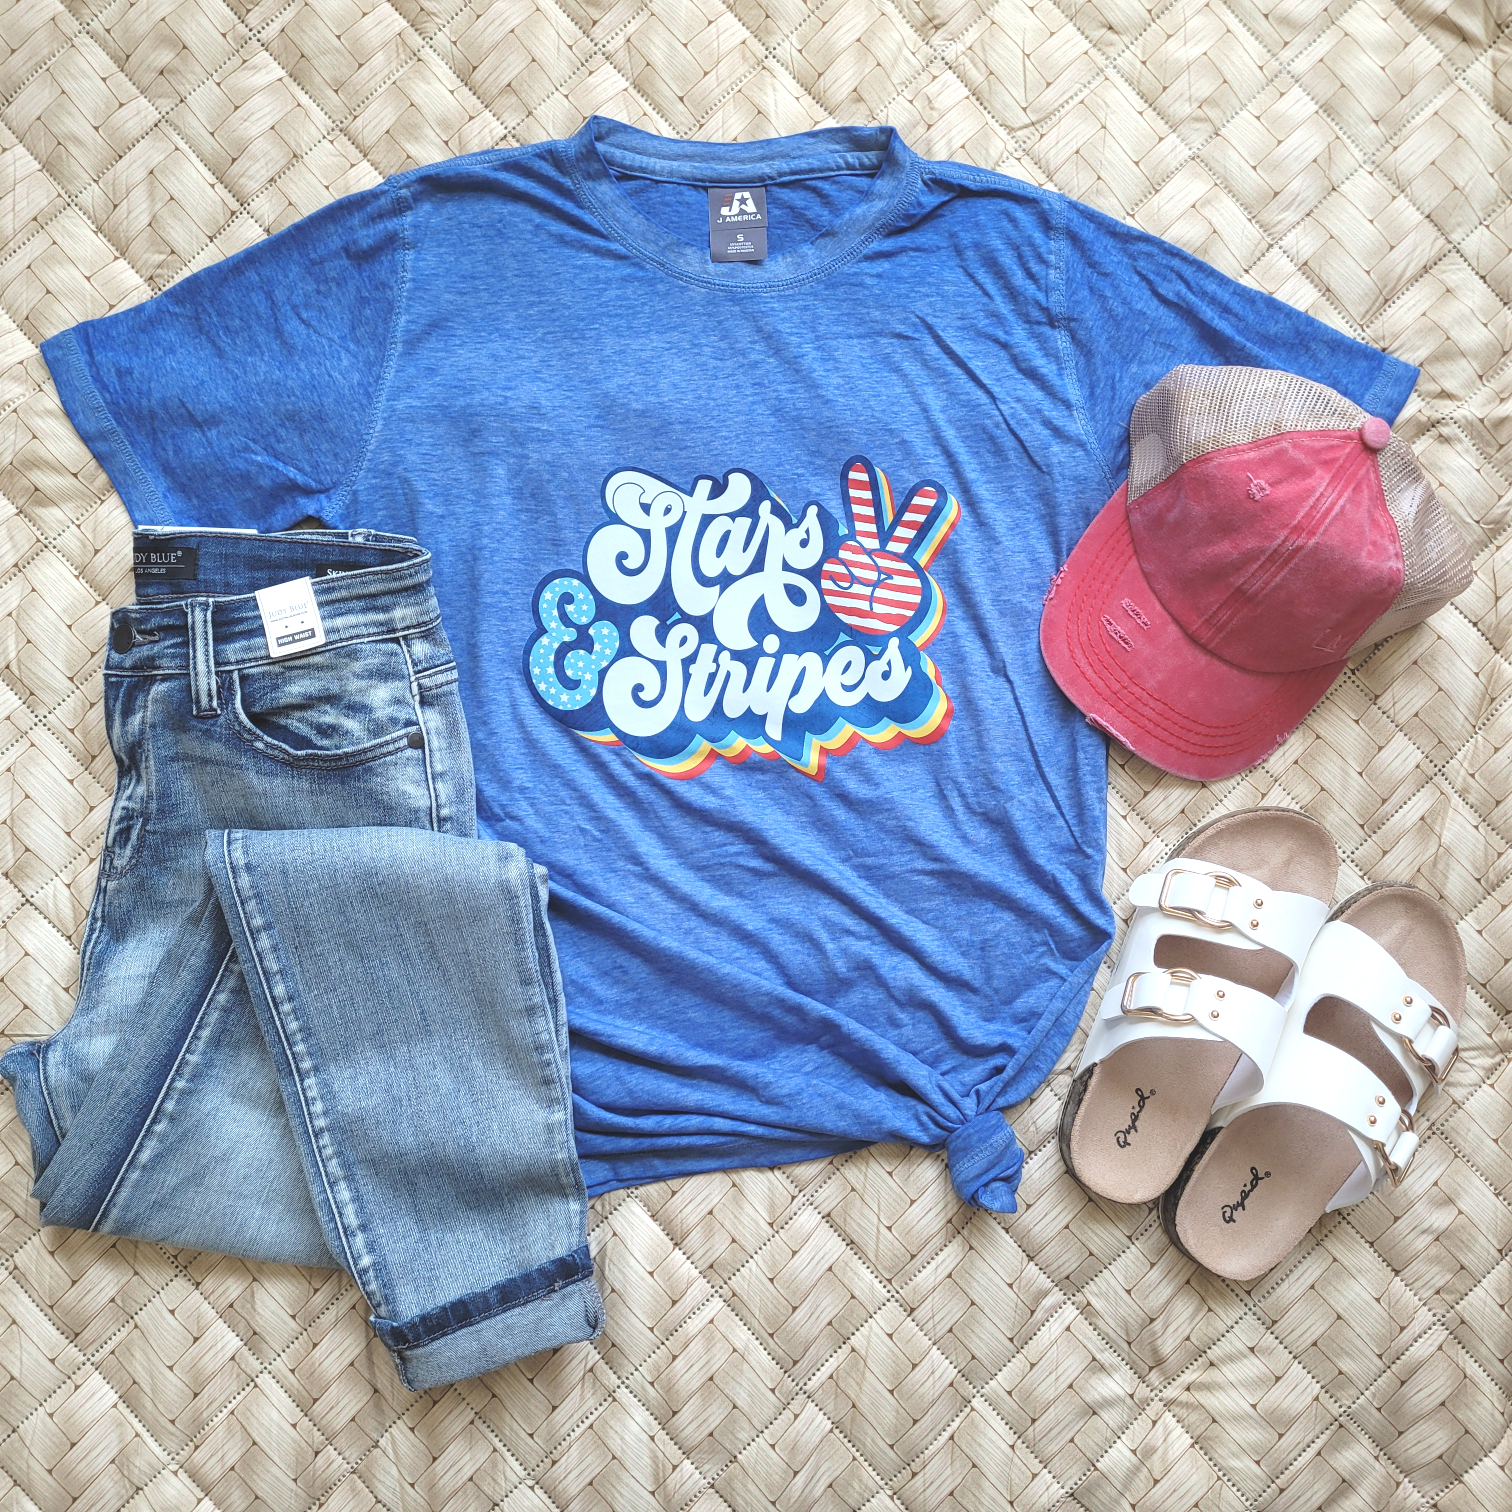 Shop Stars and Stripes Burnout-Graphic Tee at Ruby Joy Boutique, a Women's Clothing Store in Pickerington, Ohio